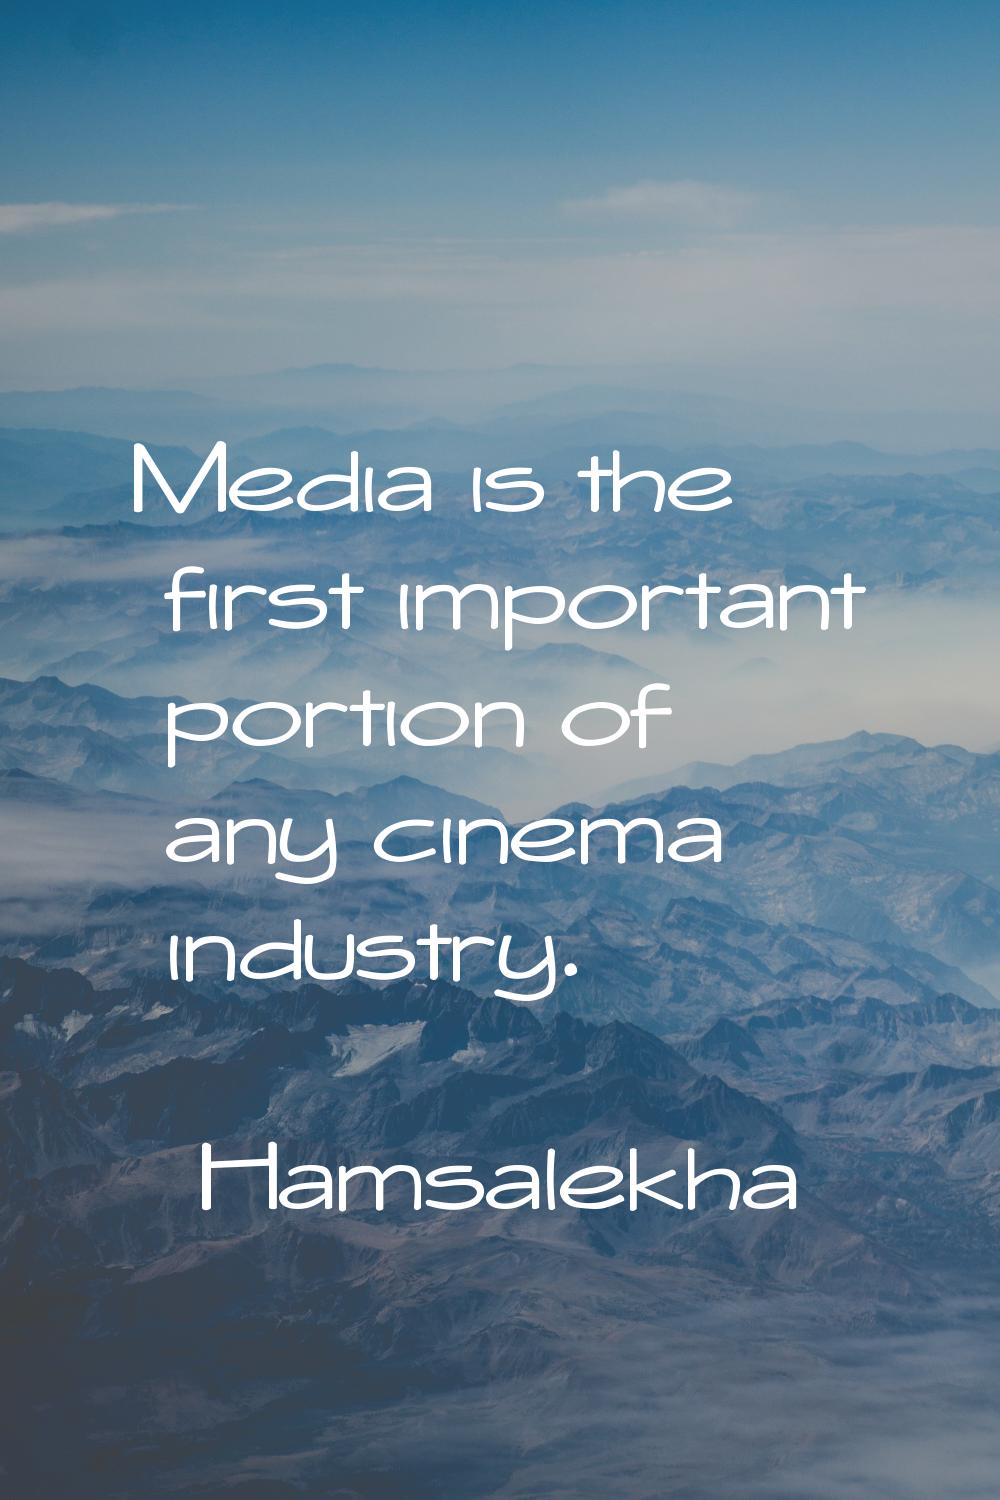 Media is the first important portion of any cinema industry.